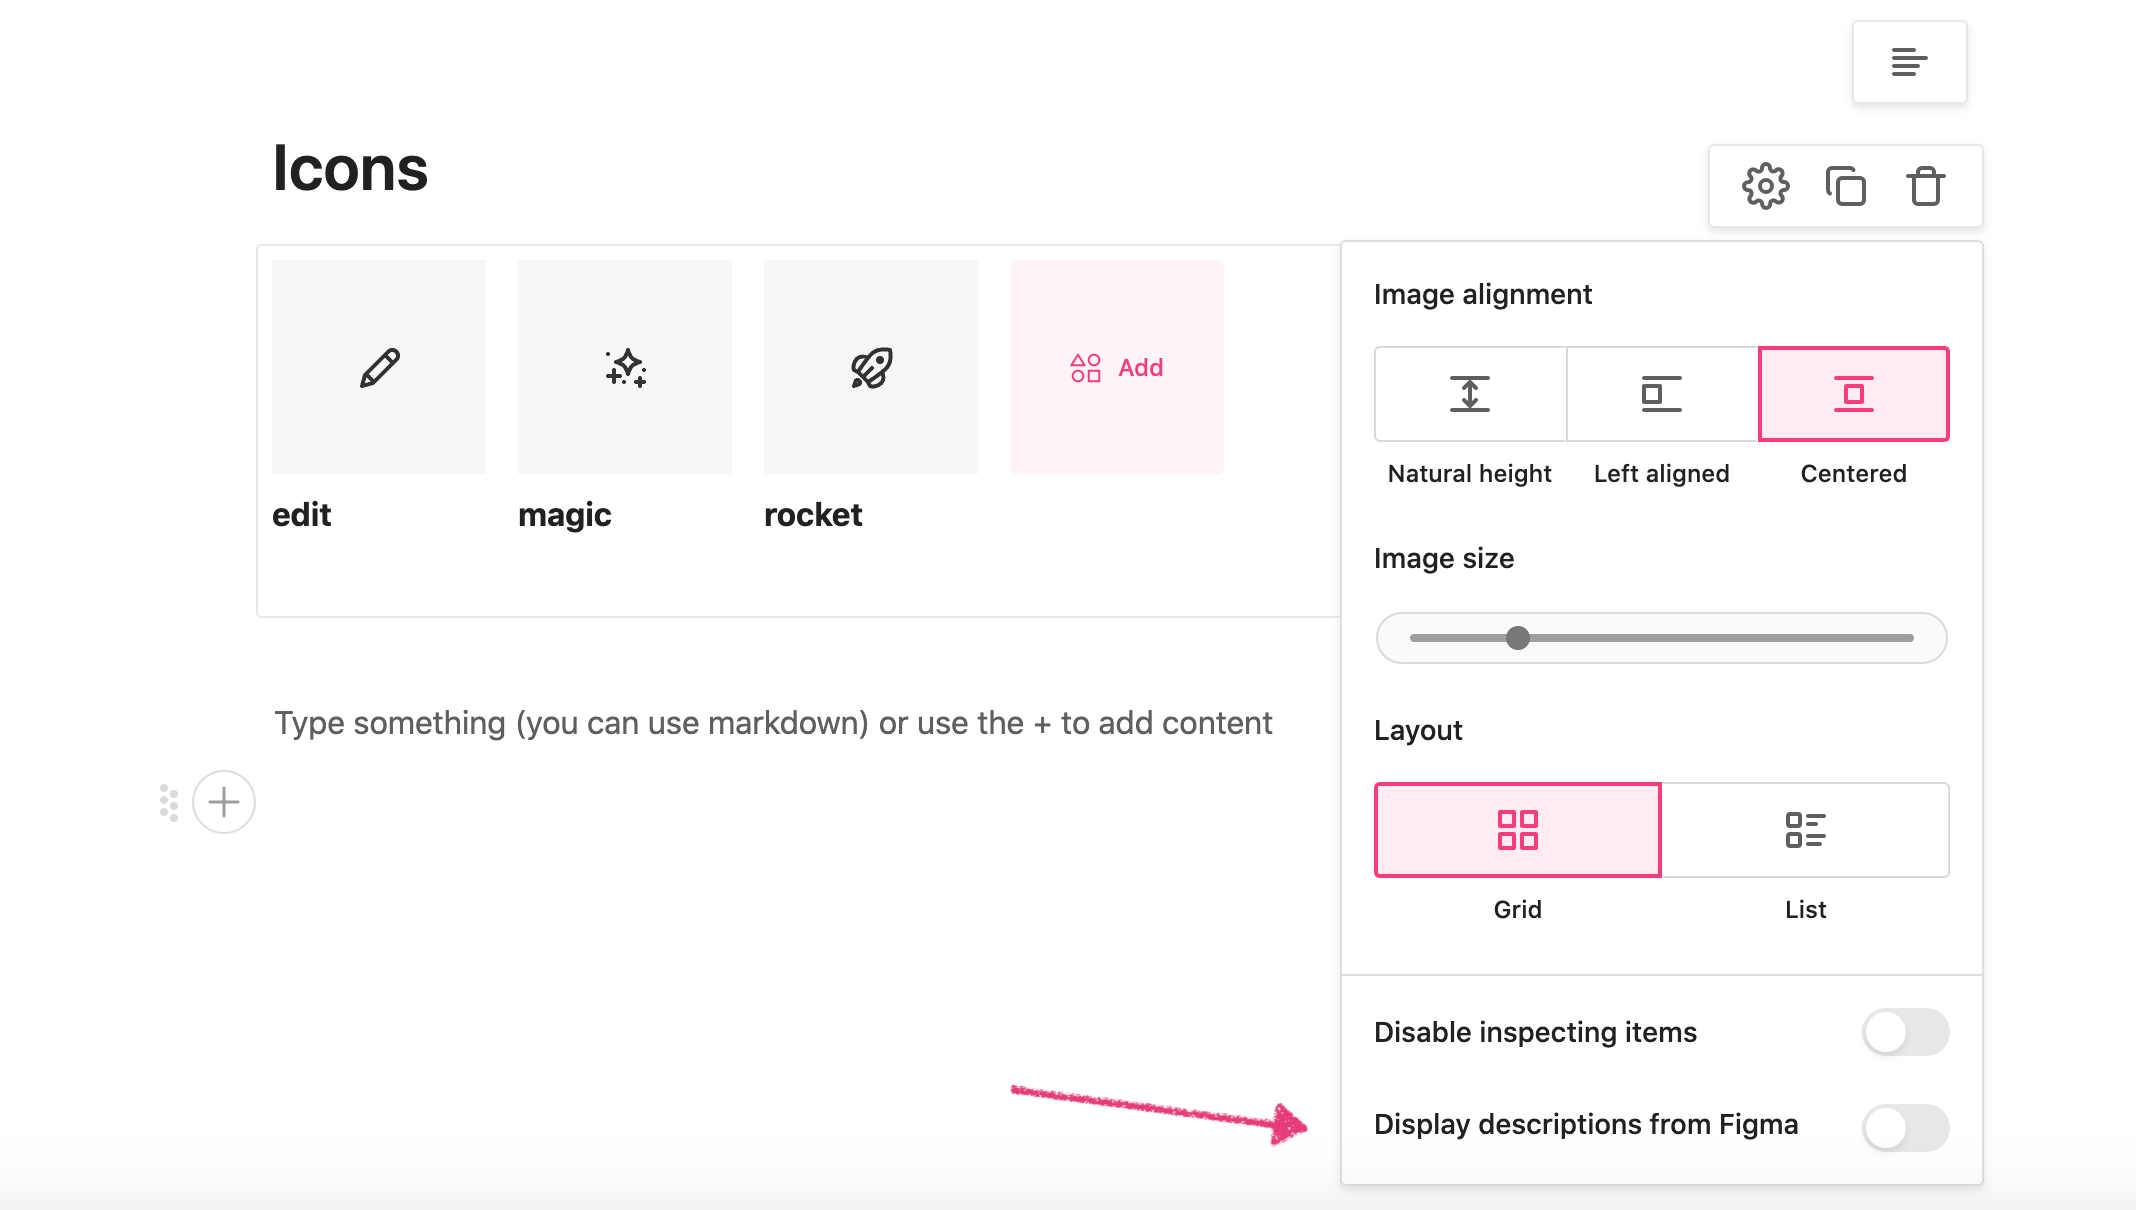 Design uploads block setting shows display descriptions from Figma function.